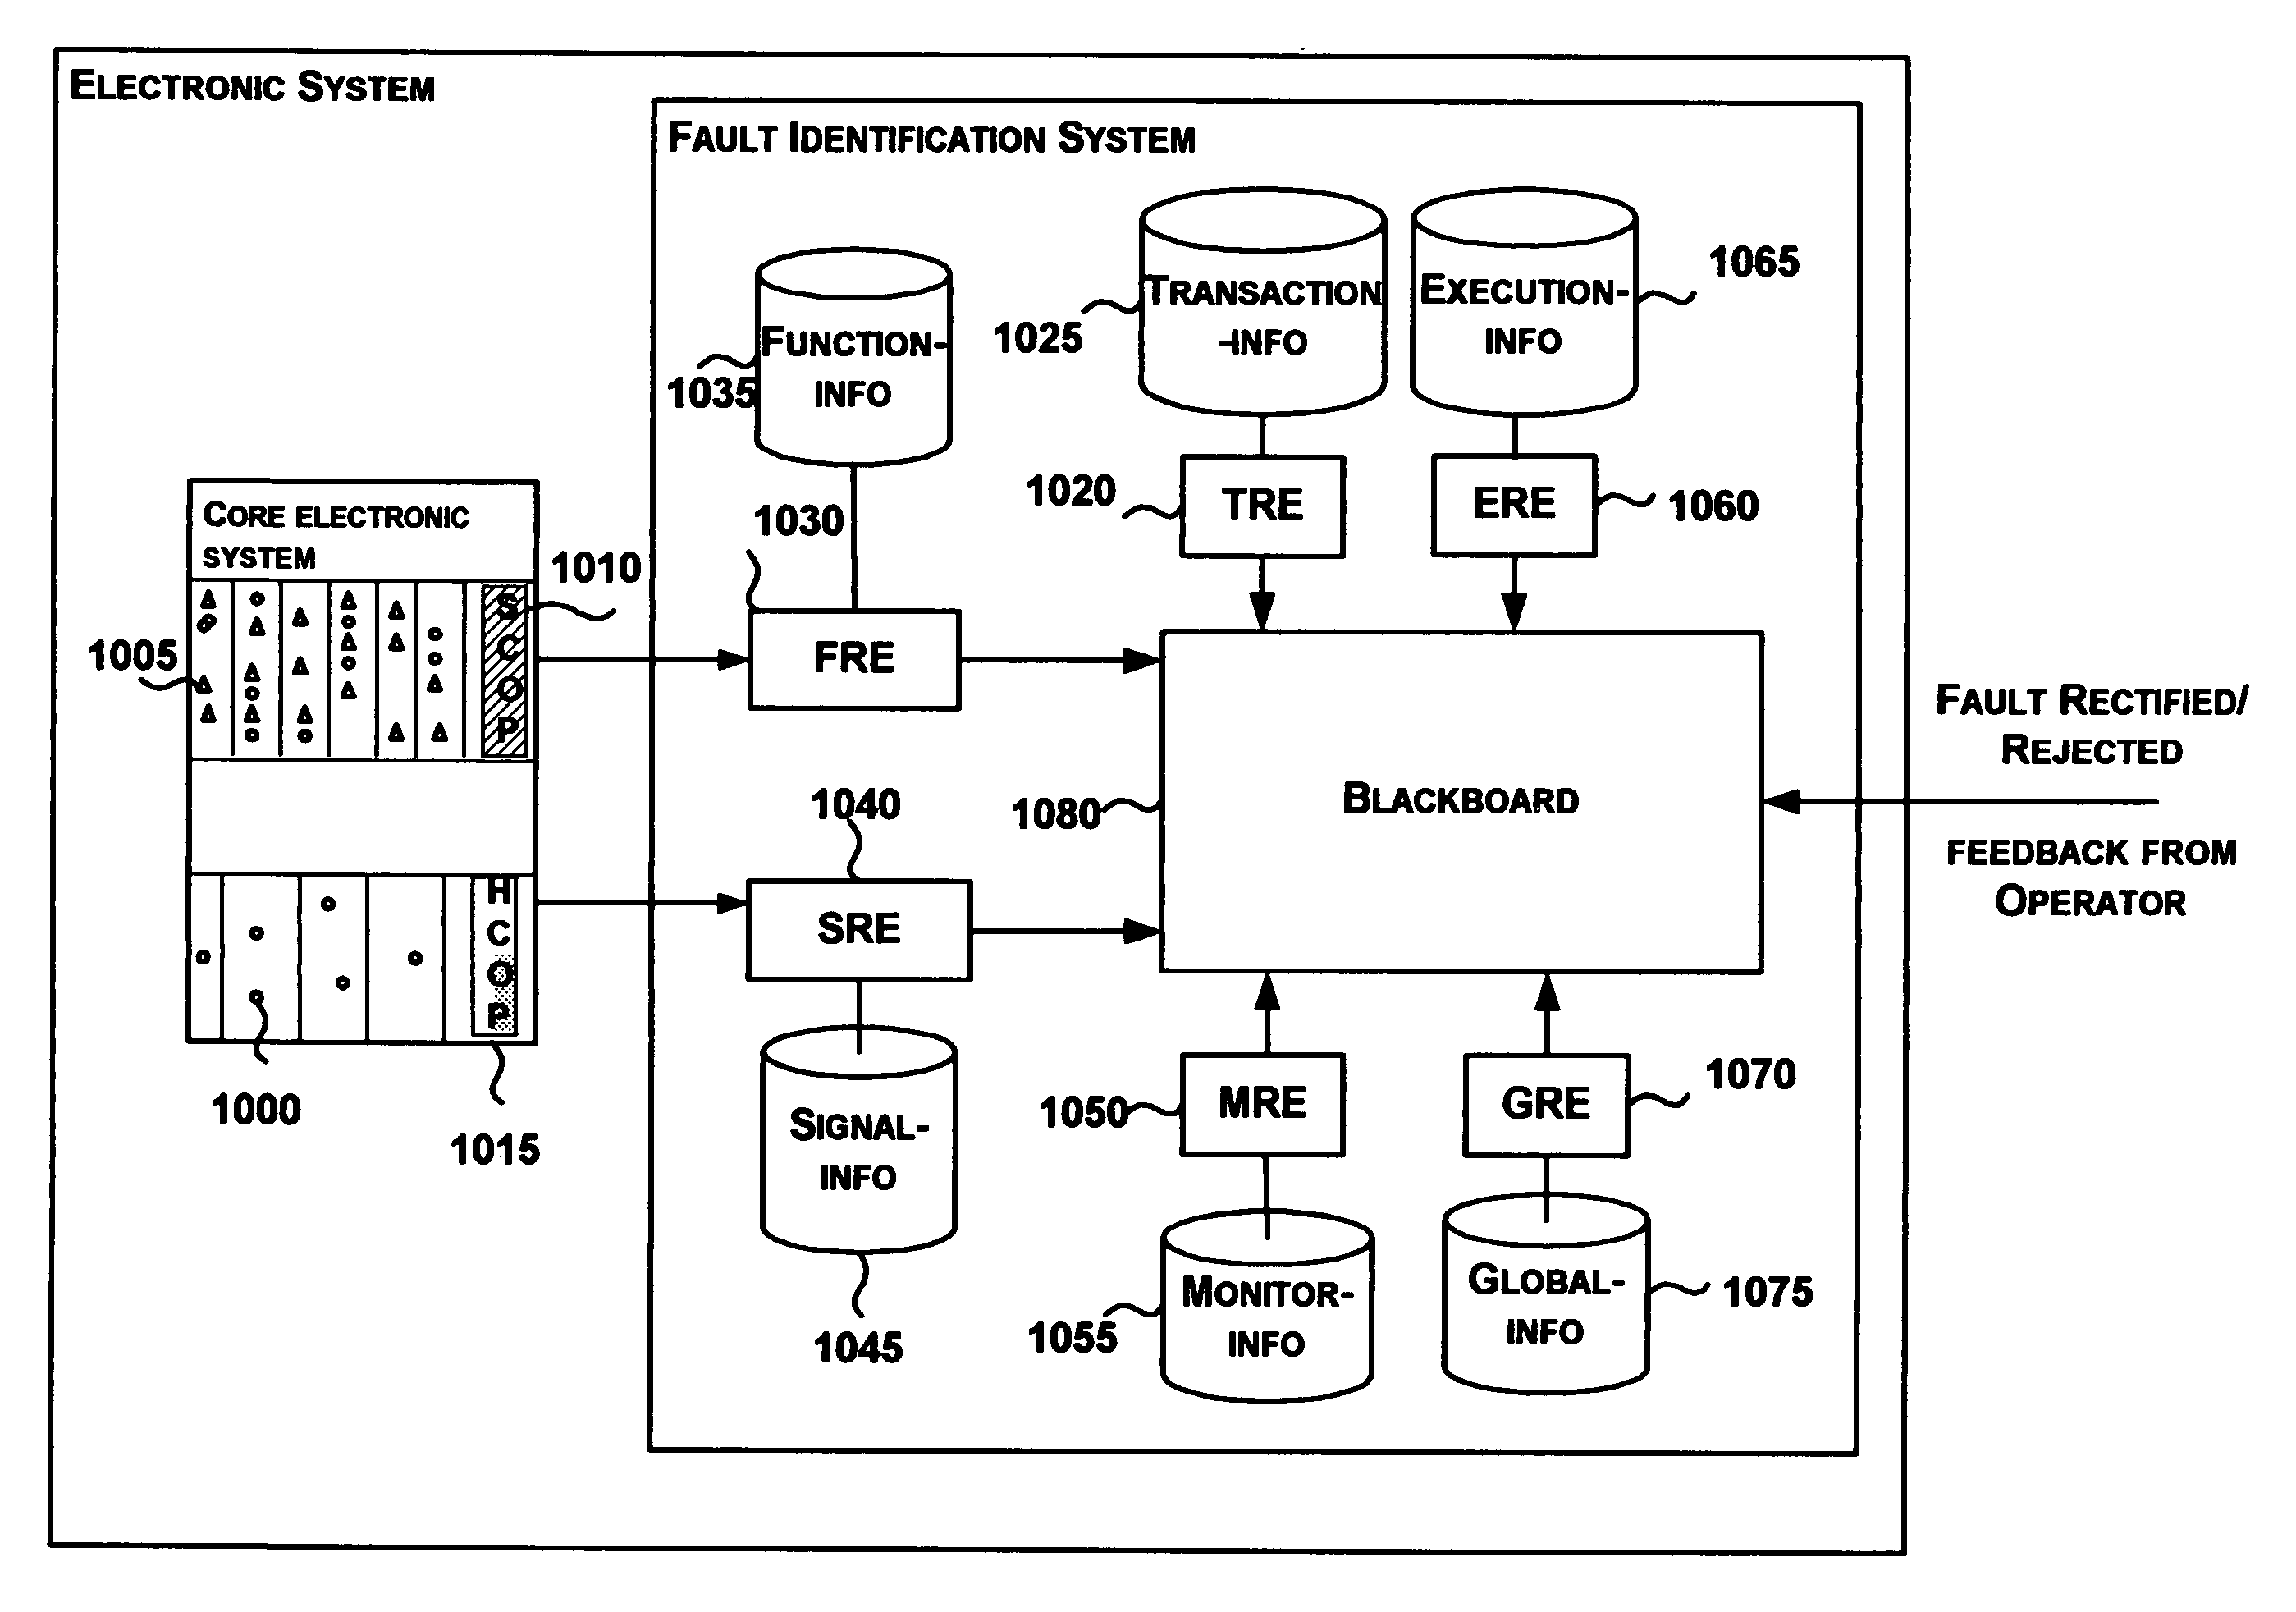 System and method for fault identification in an electronic system based on context-based alarm analysis